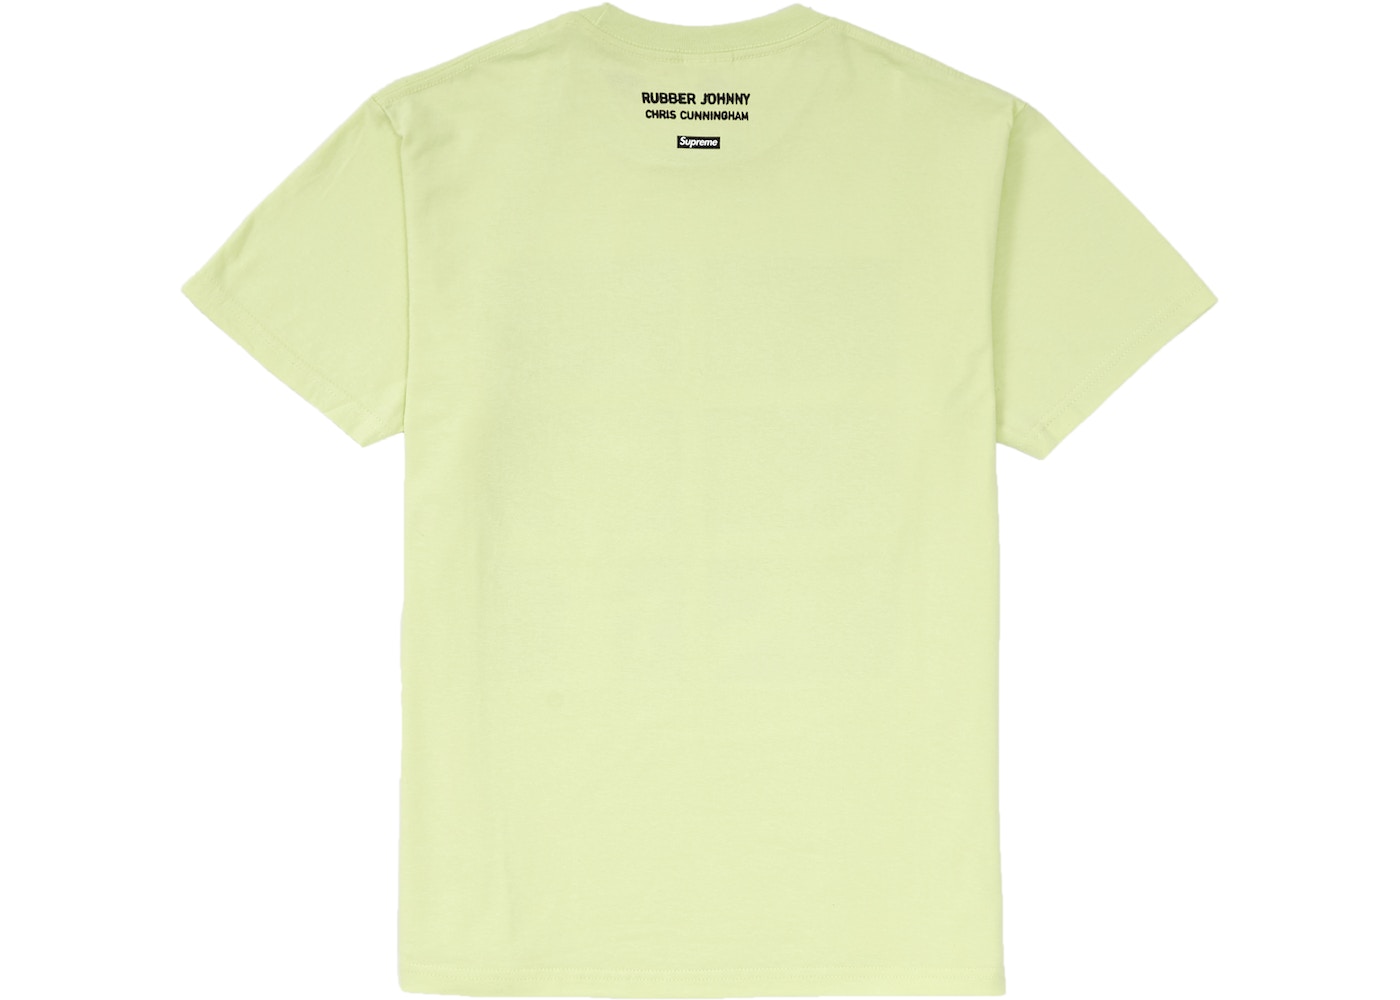 Supreme Chris Cunningham Rubber Johnny Tee Pale Mint - FW18